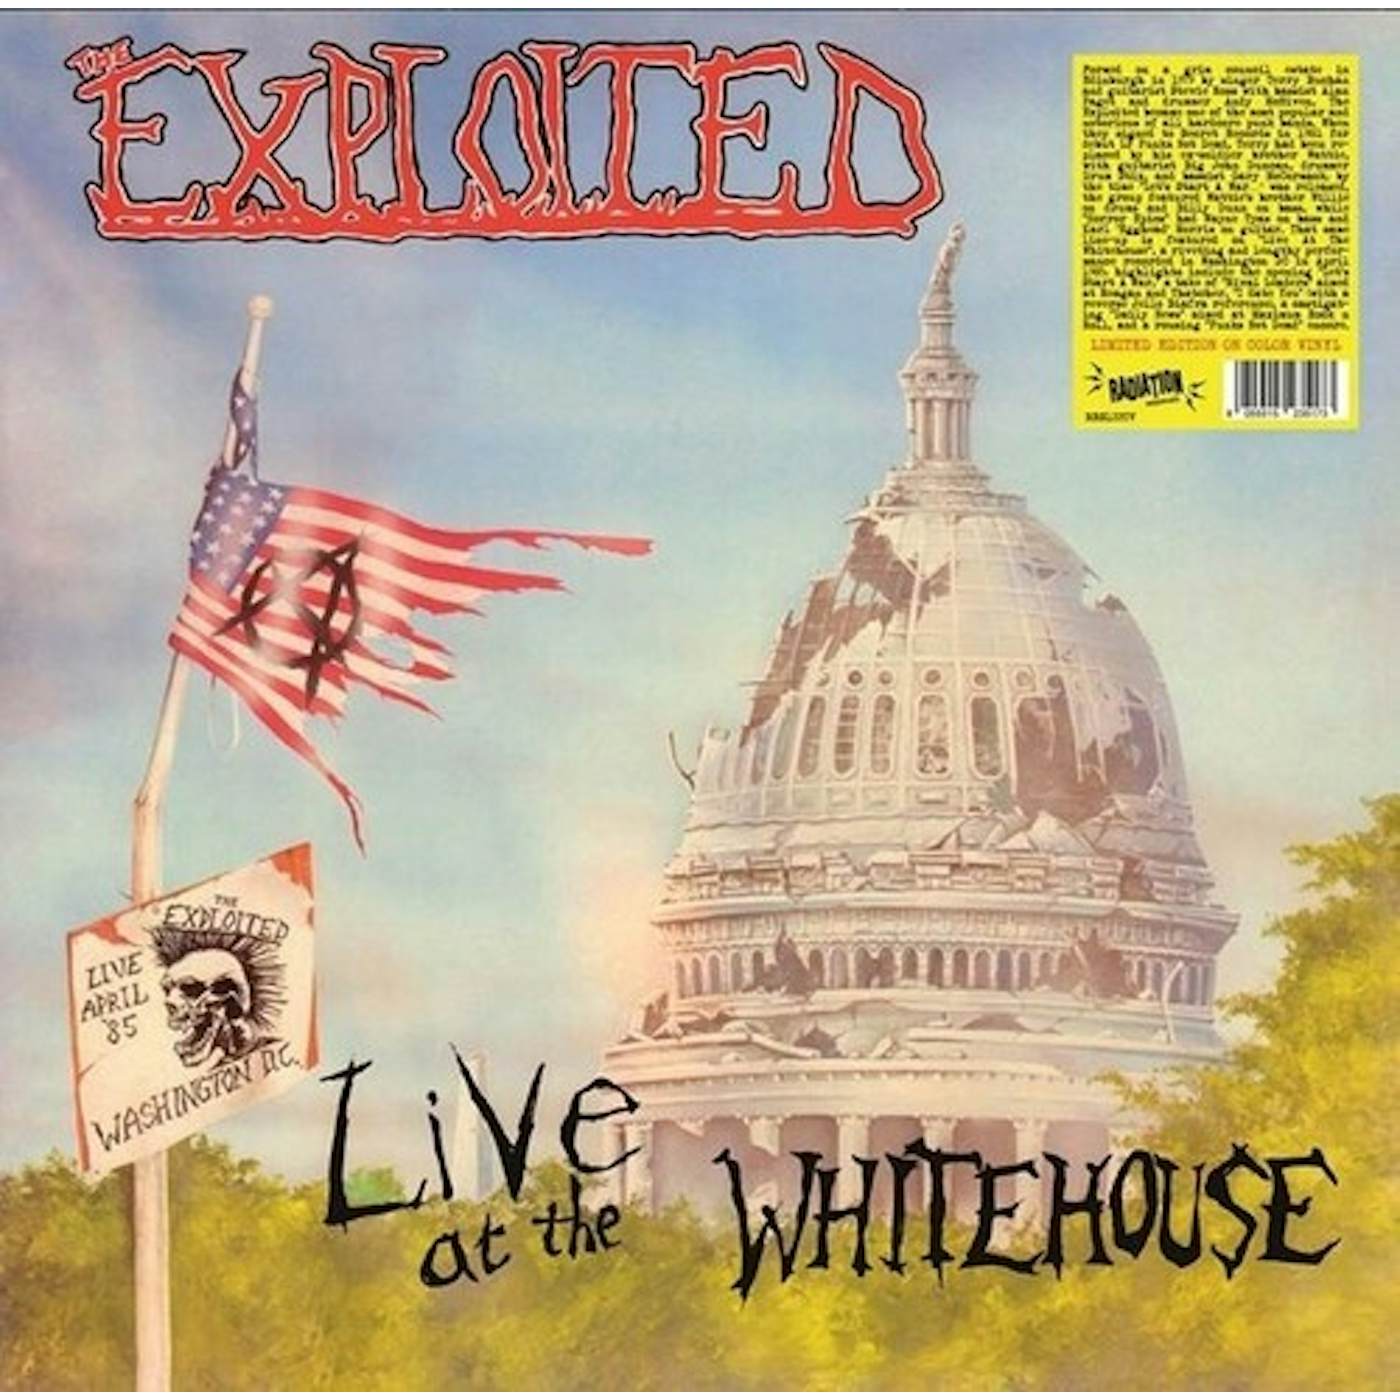 The Exploited LIVE AT THE WHITEHOUSE Vinyl Record